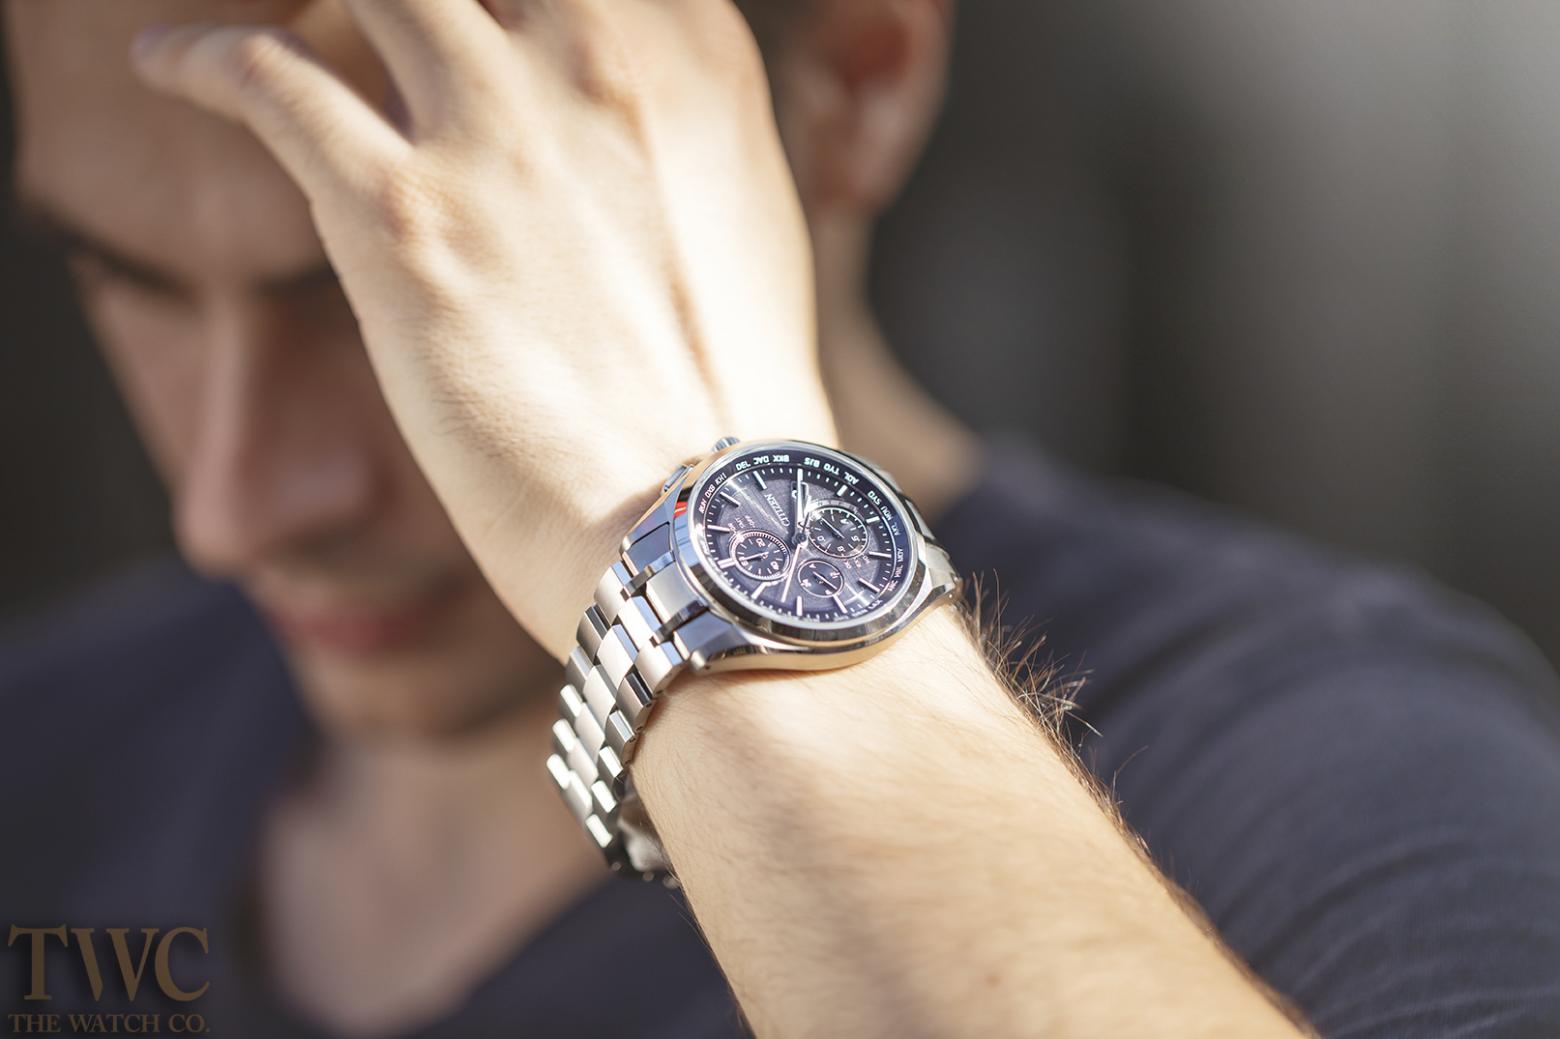 Citizen Eco-Drive: What You Need To Know?